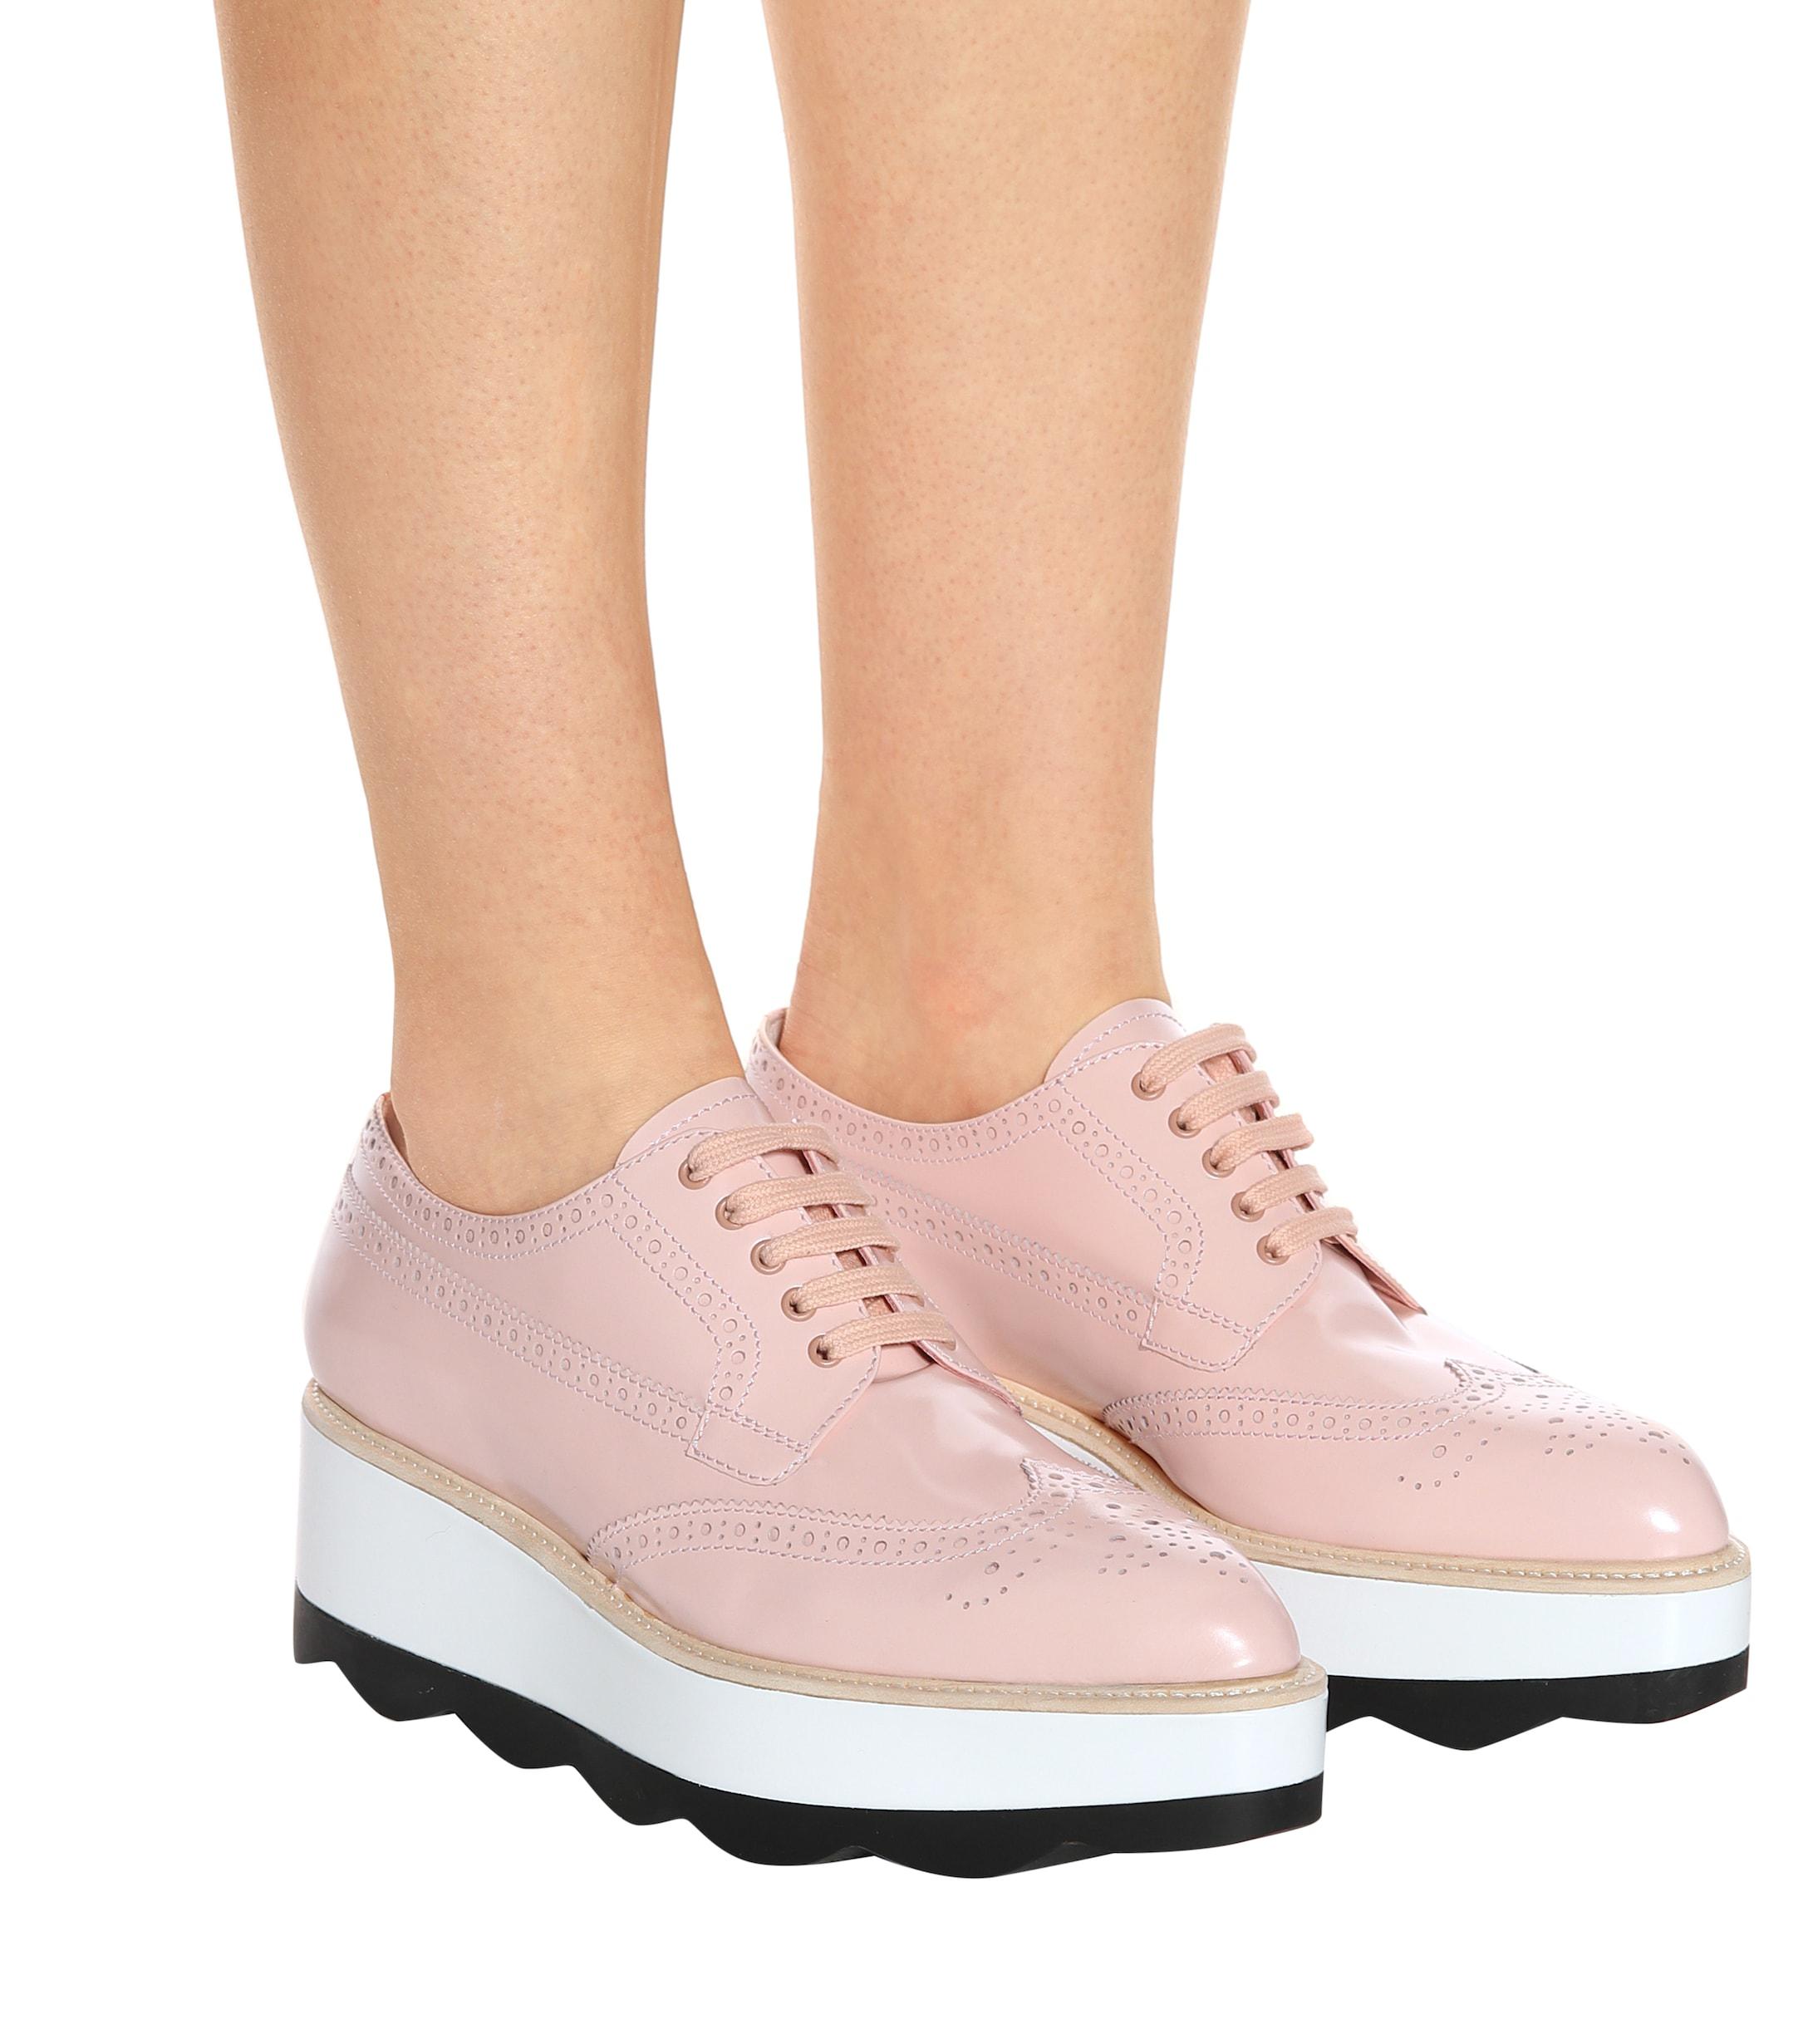 Prada Leather Platform Oxford Shoes in Pink | Lyst